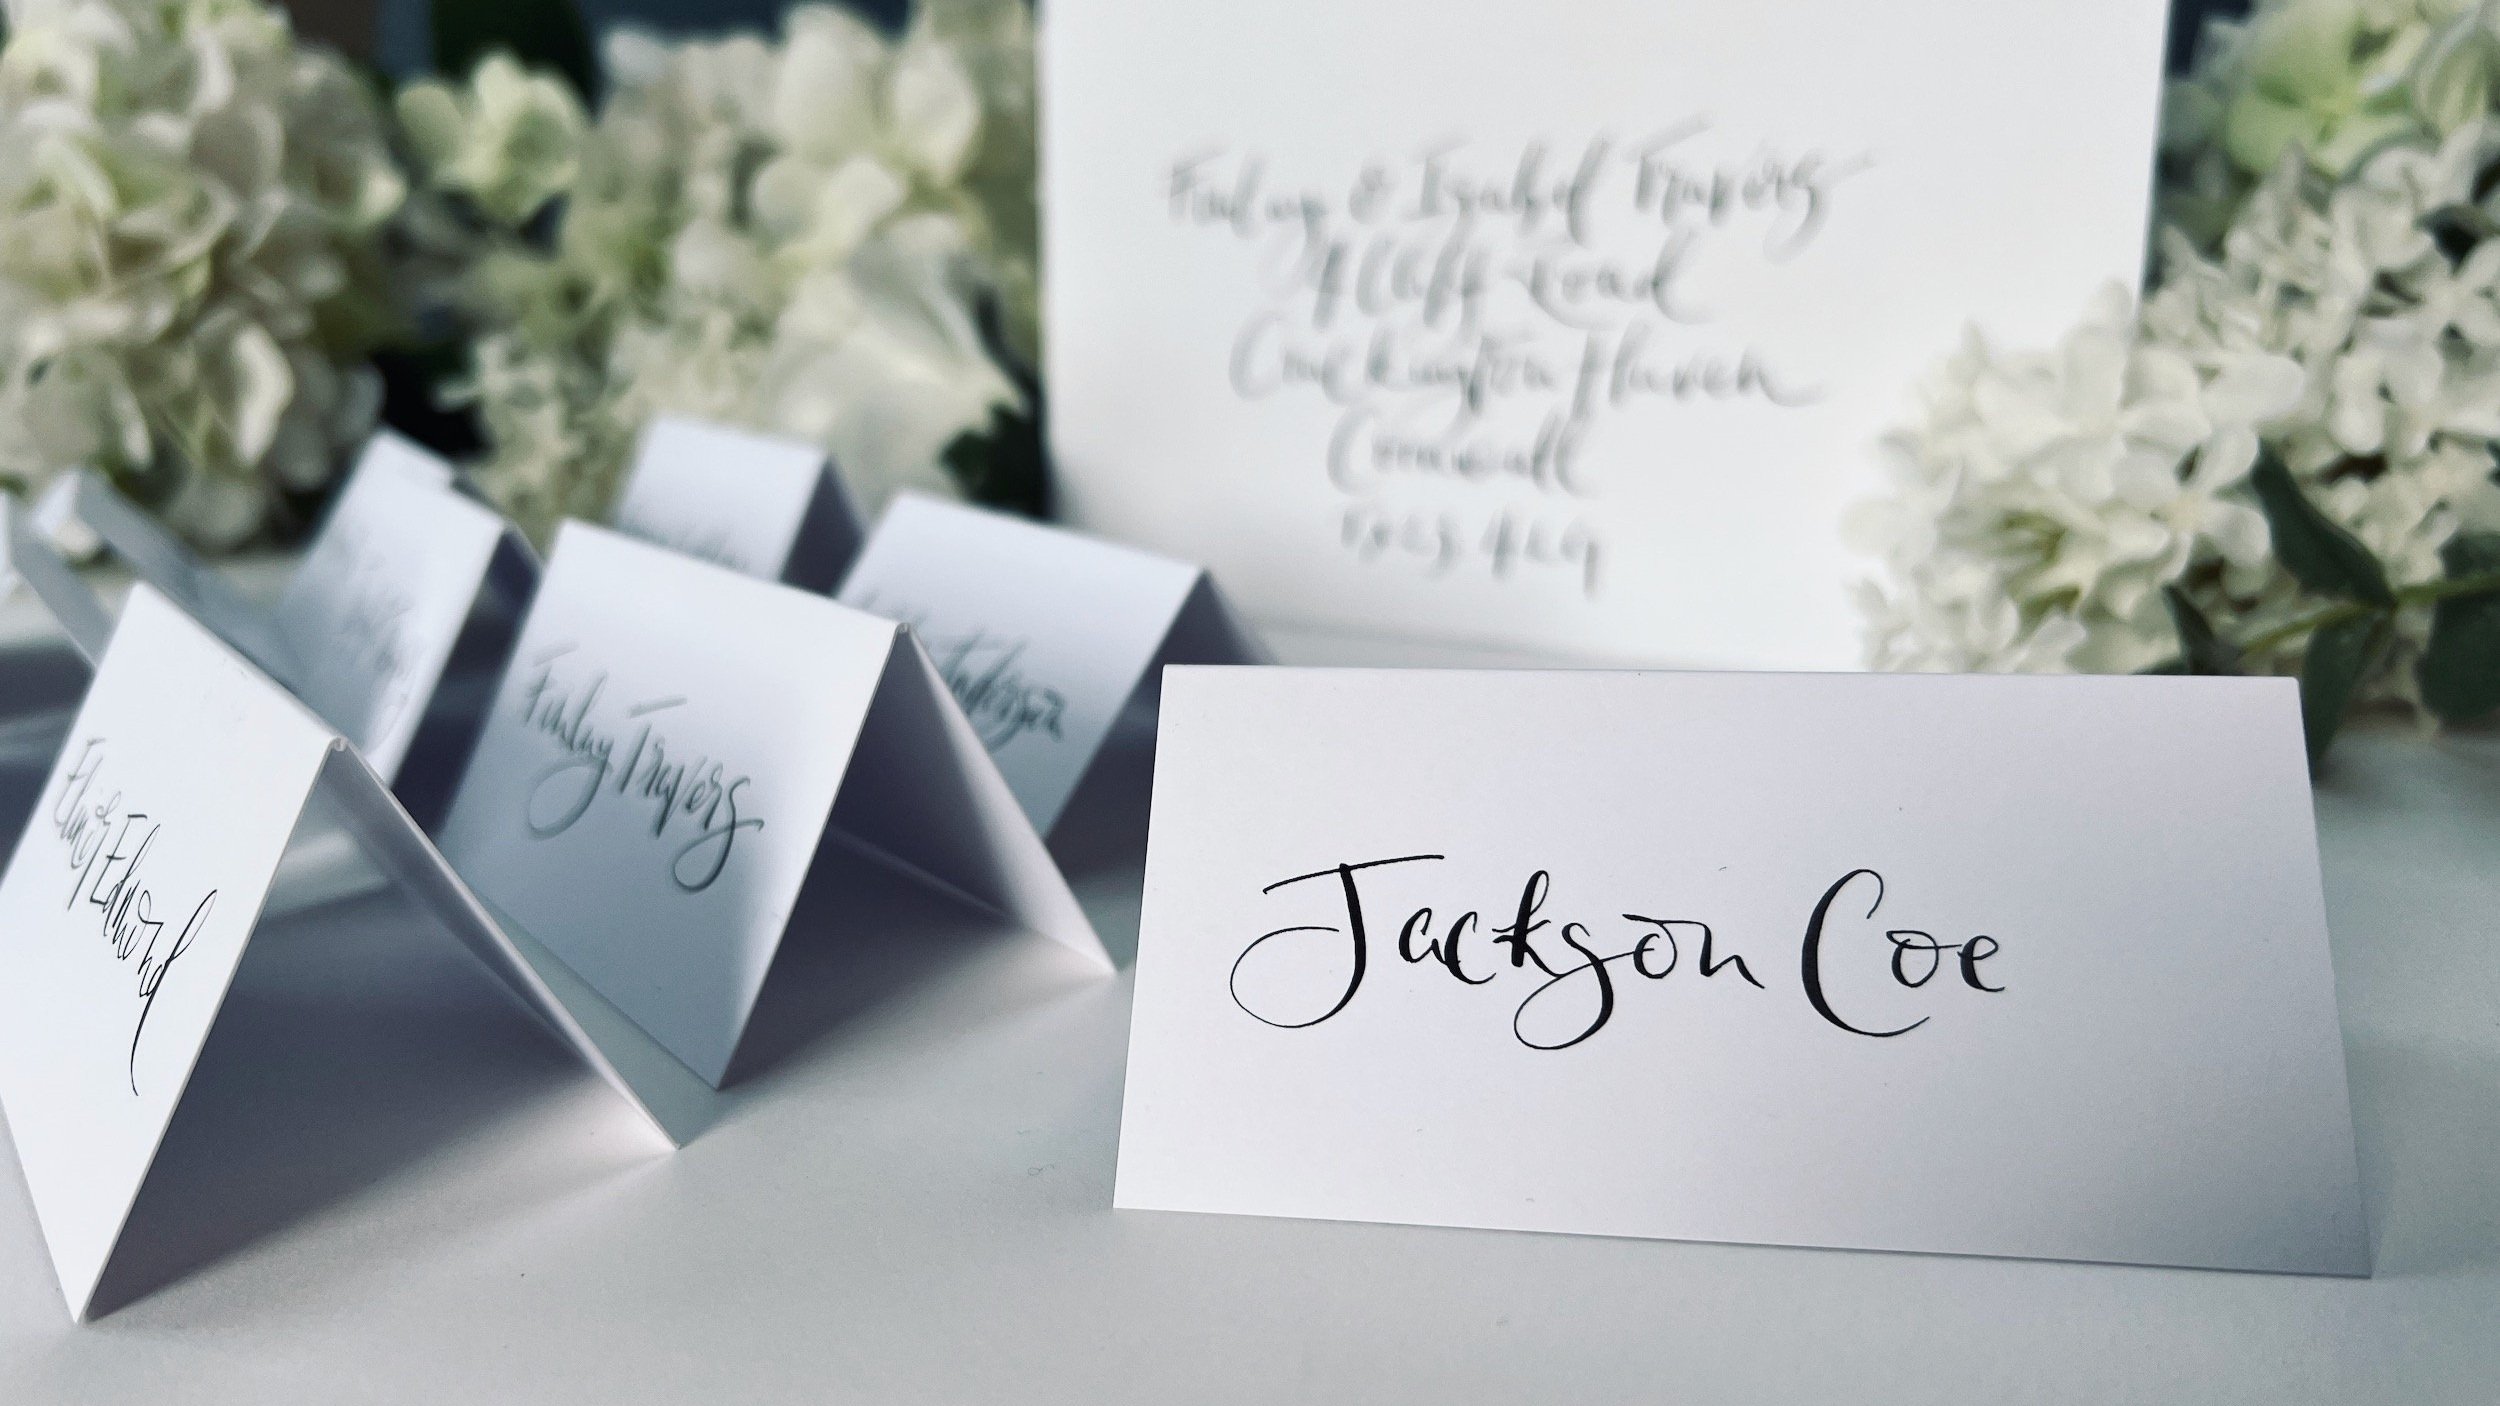 Delfont+Ink+Modern+calligraphy+style+for+weddings+events.jpg